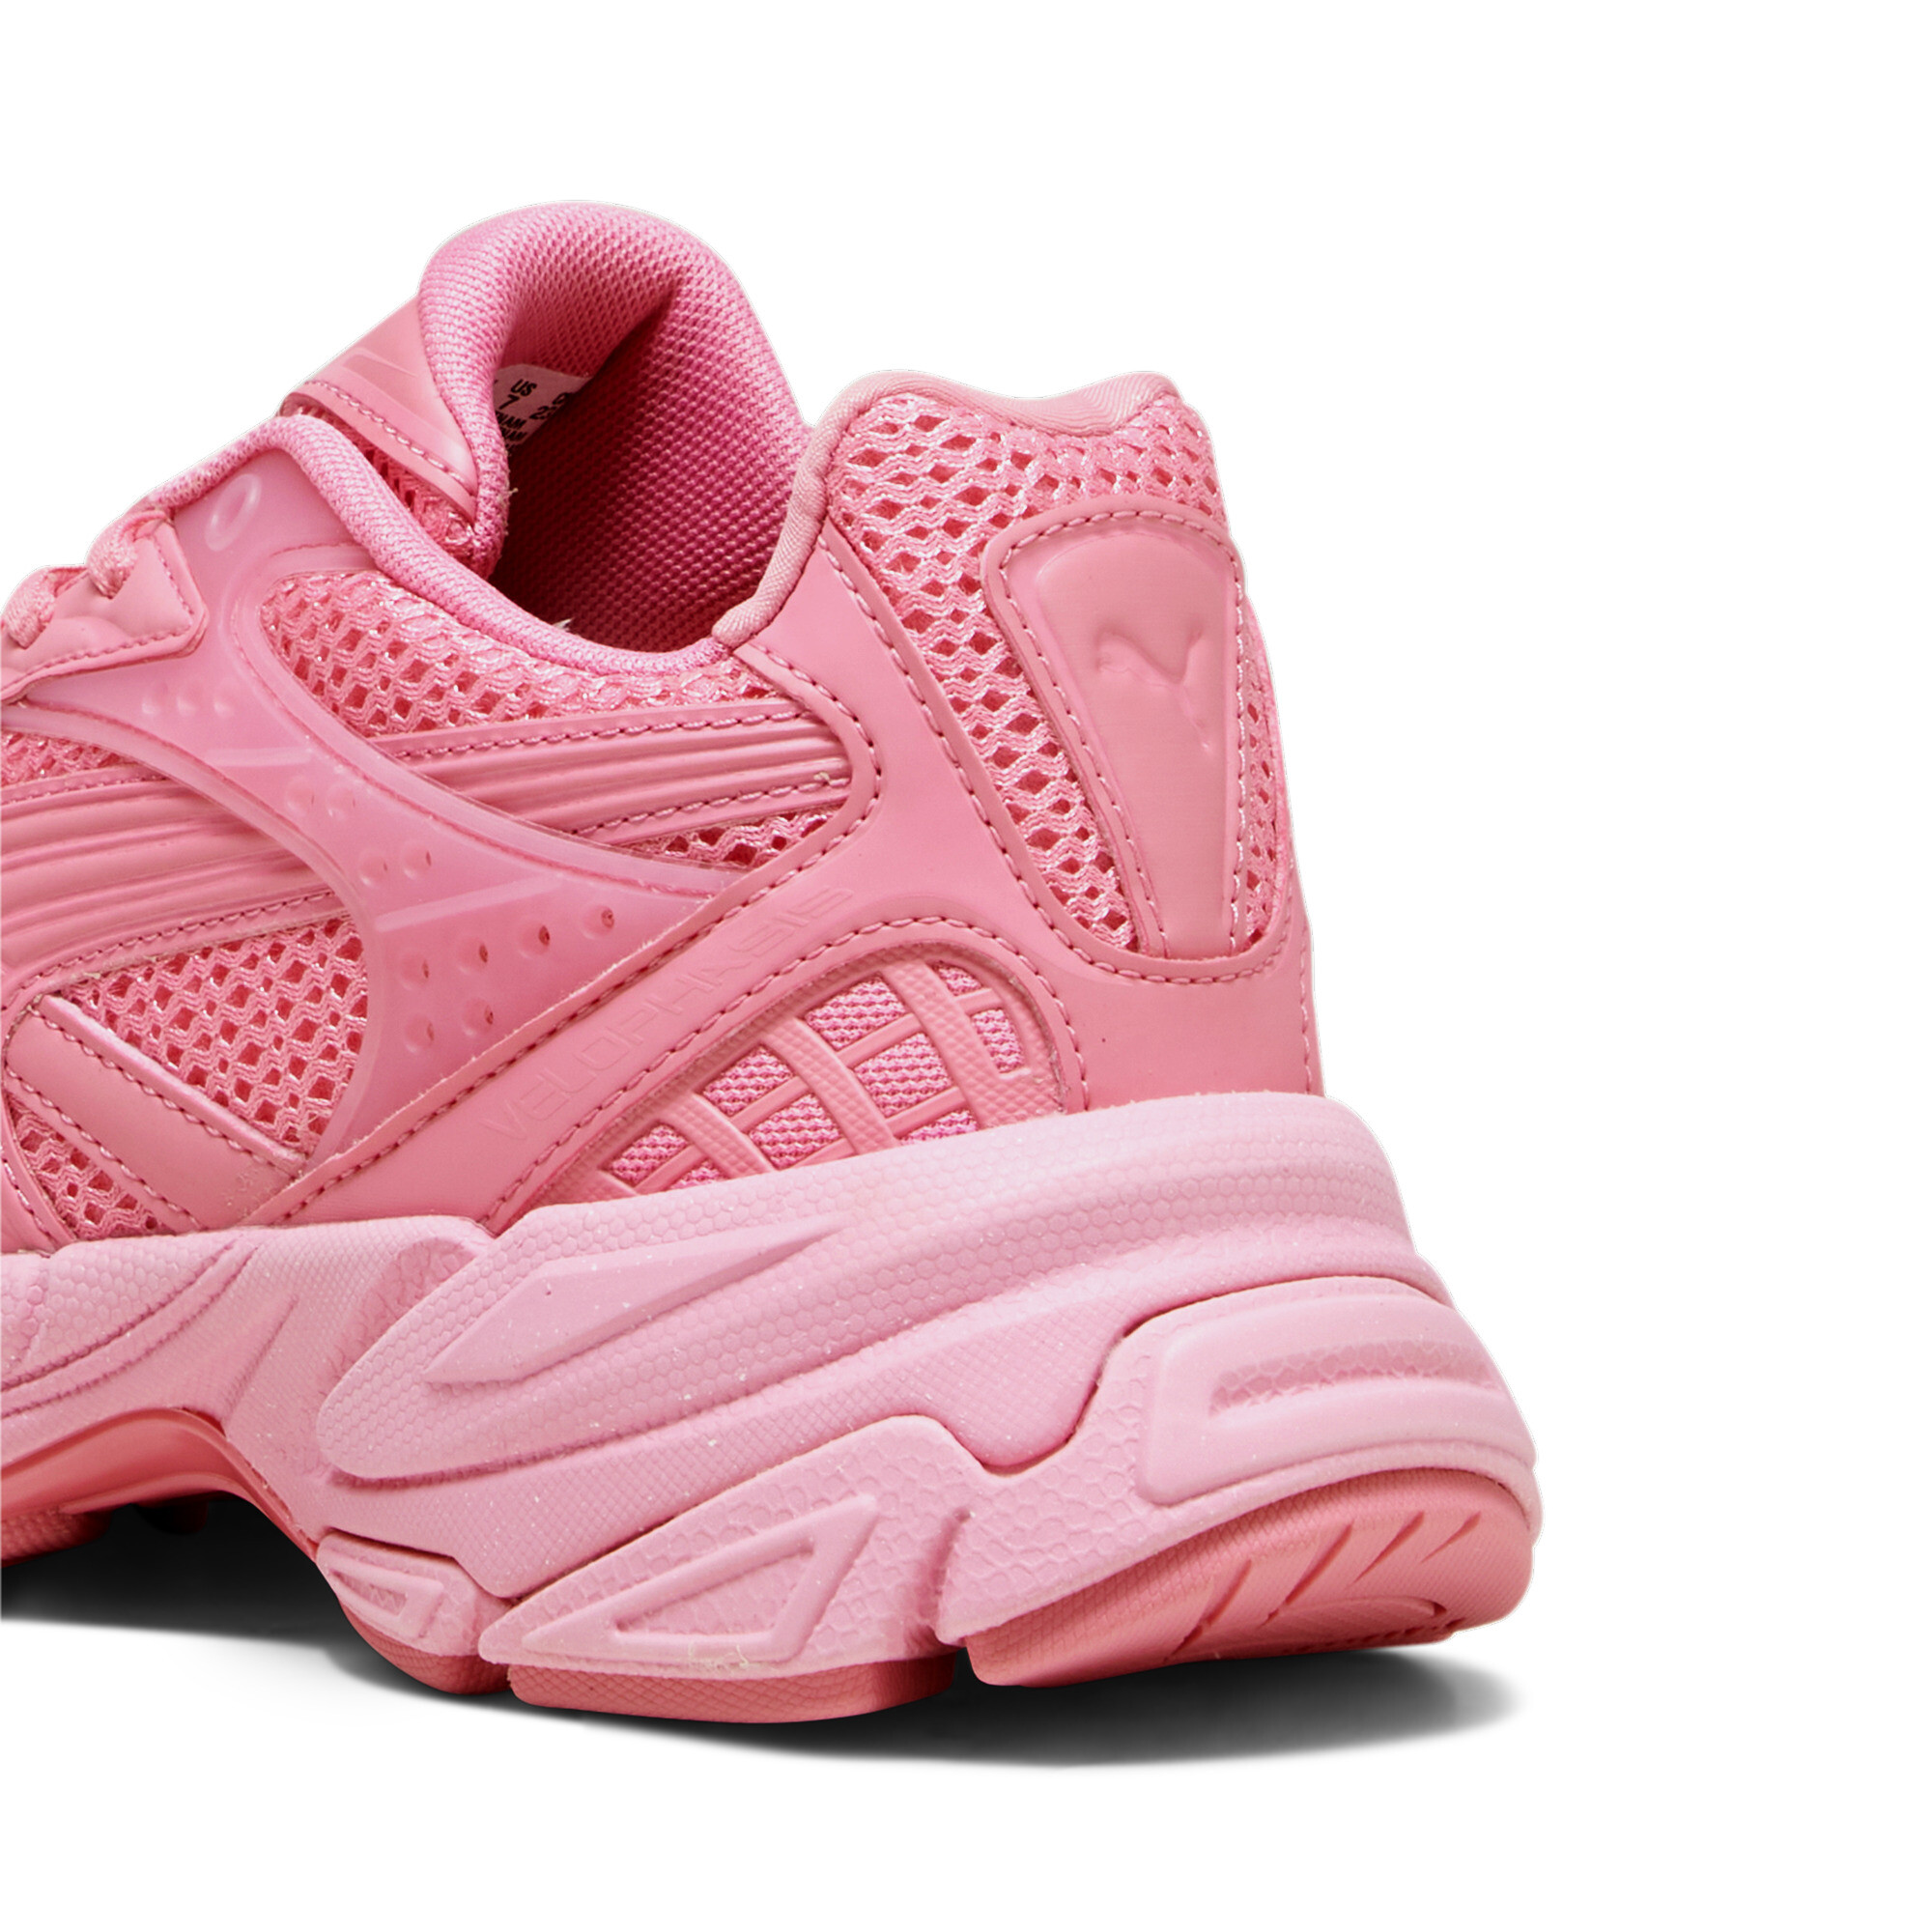 Puma Velophasis Technisch Sneakers, Pink, Size 40, Shoes